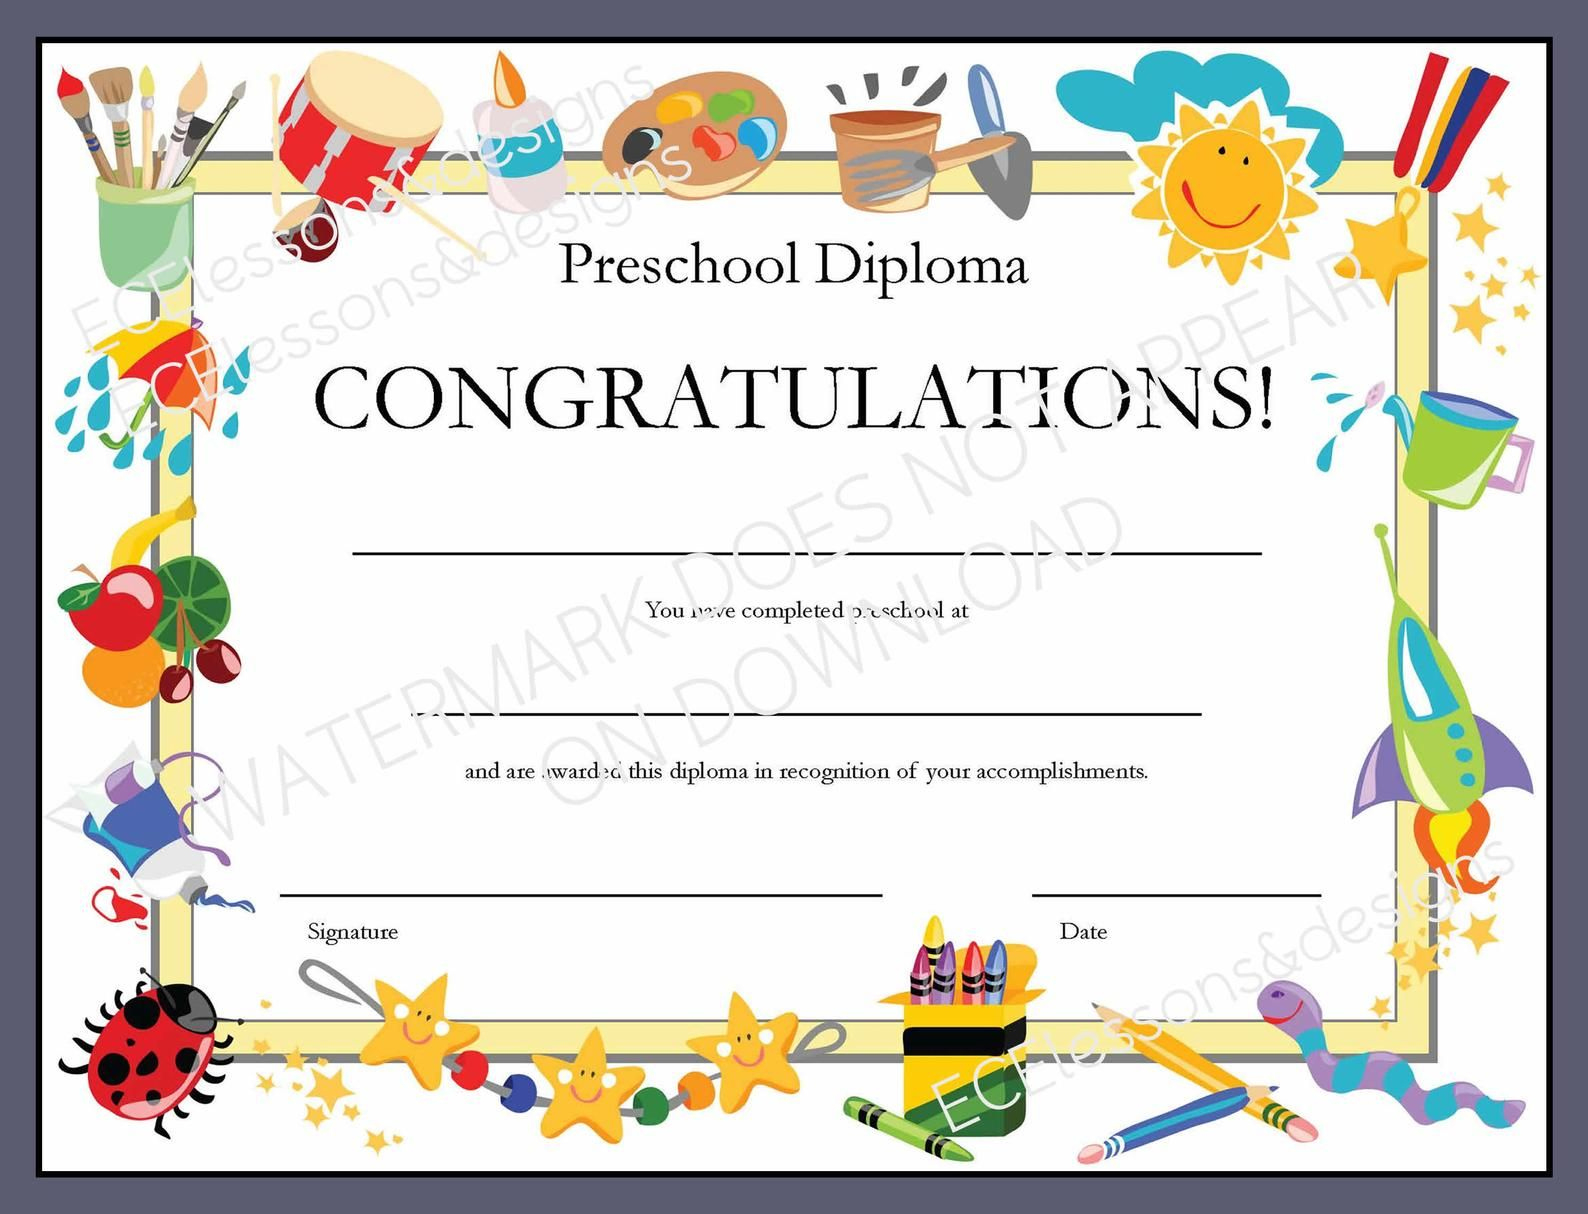 Diploma/Certificate For Preschool Or Daycare: Printable Pdf | Etsy with regard to Daycare Diploma Template Free